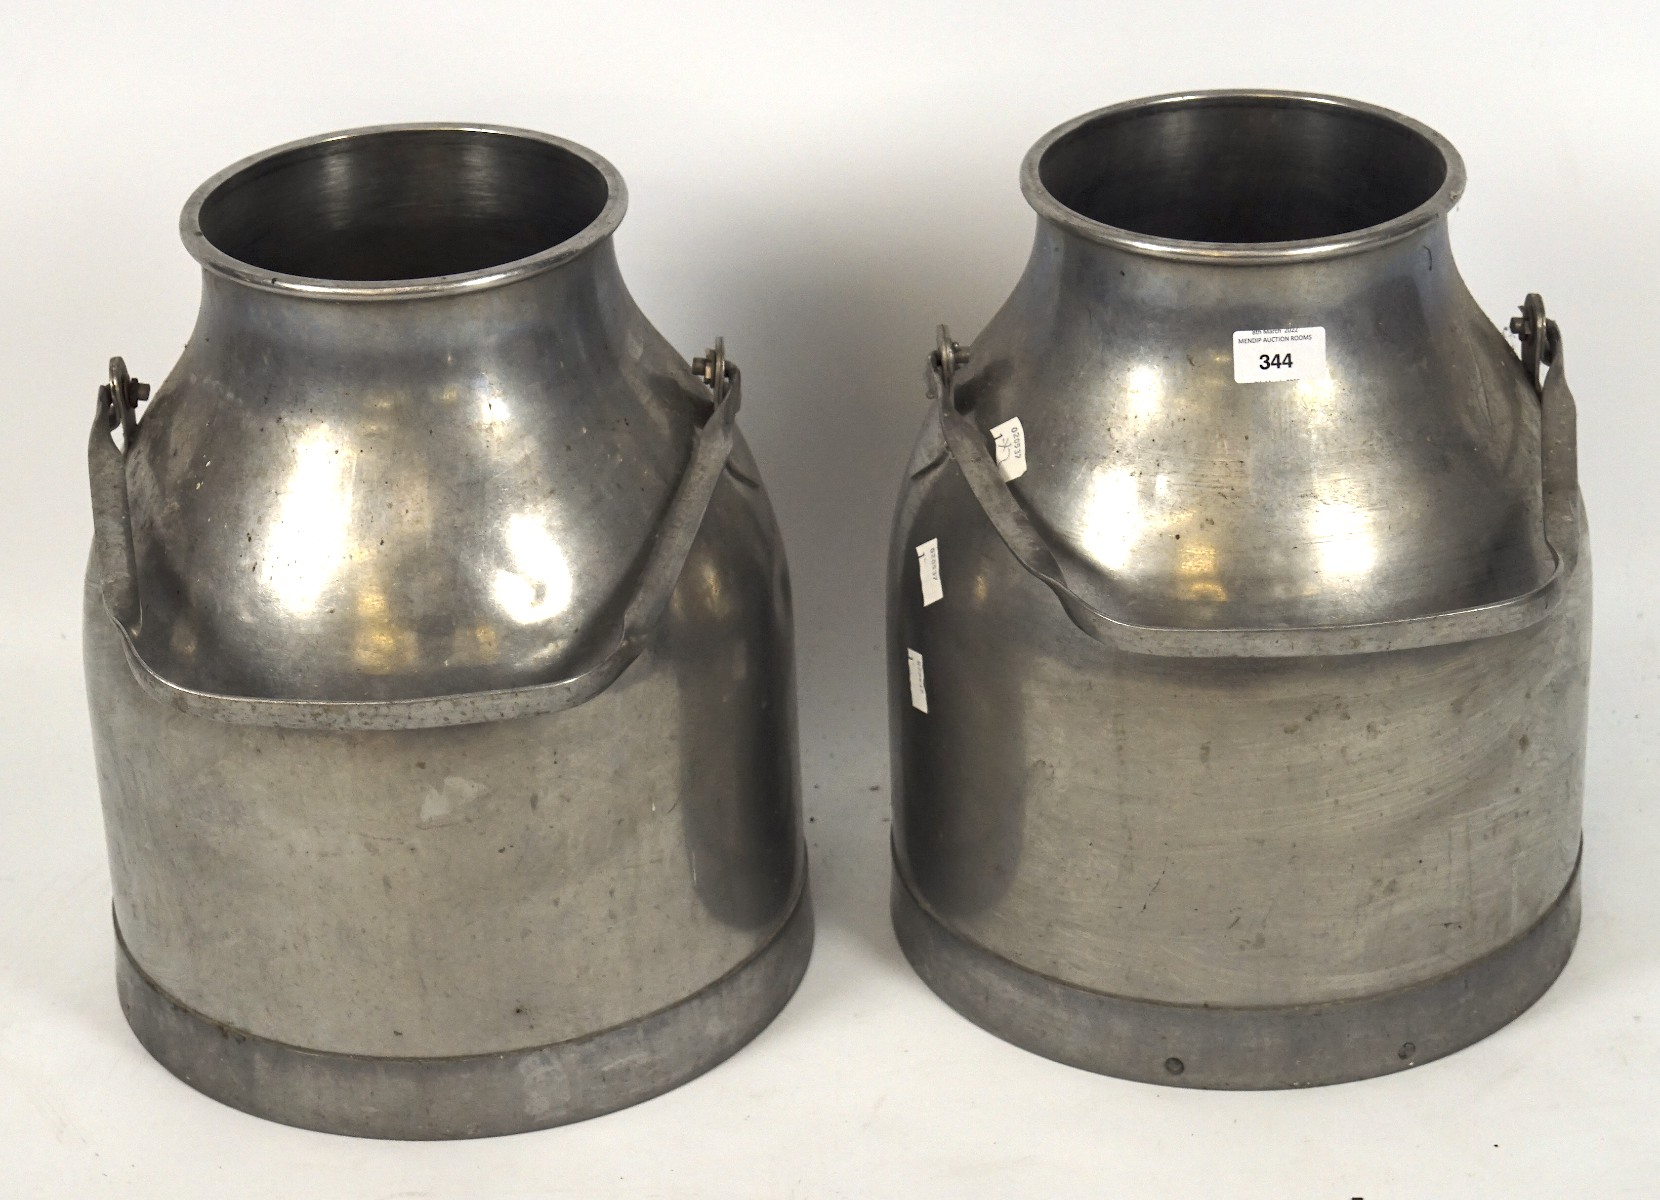 Two contemporary stainless steel milk pails, each with a single swing handle,